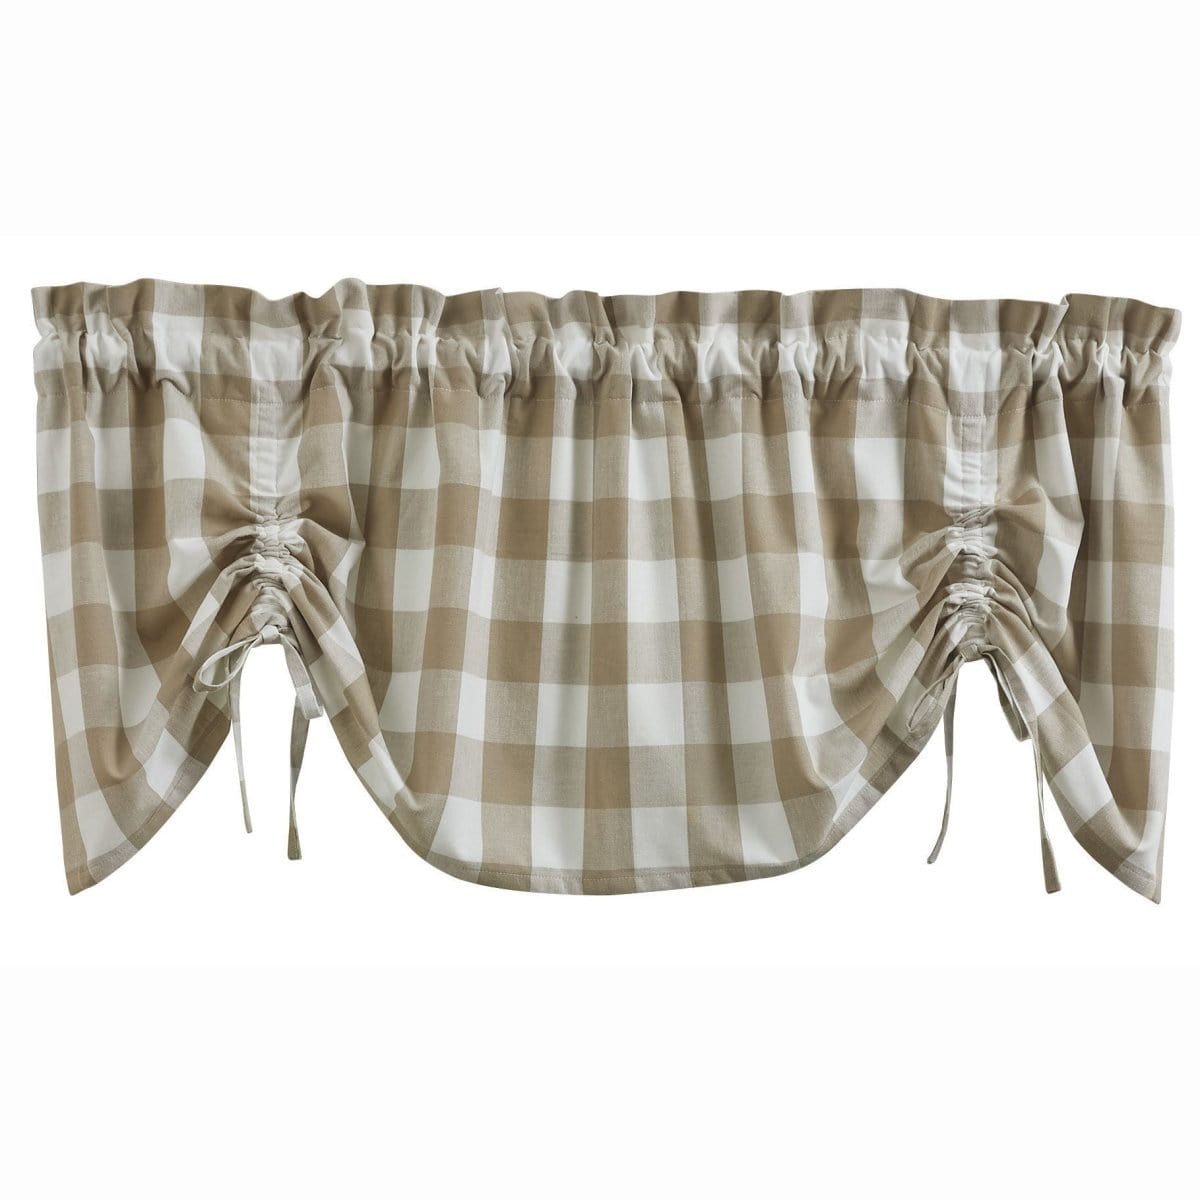 Wicklow Check in Natural Tie Up Farmhouse Valance Lined-Park Designs-The Village Merchant